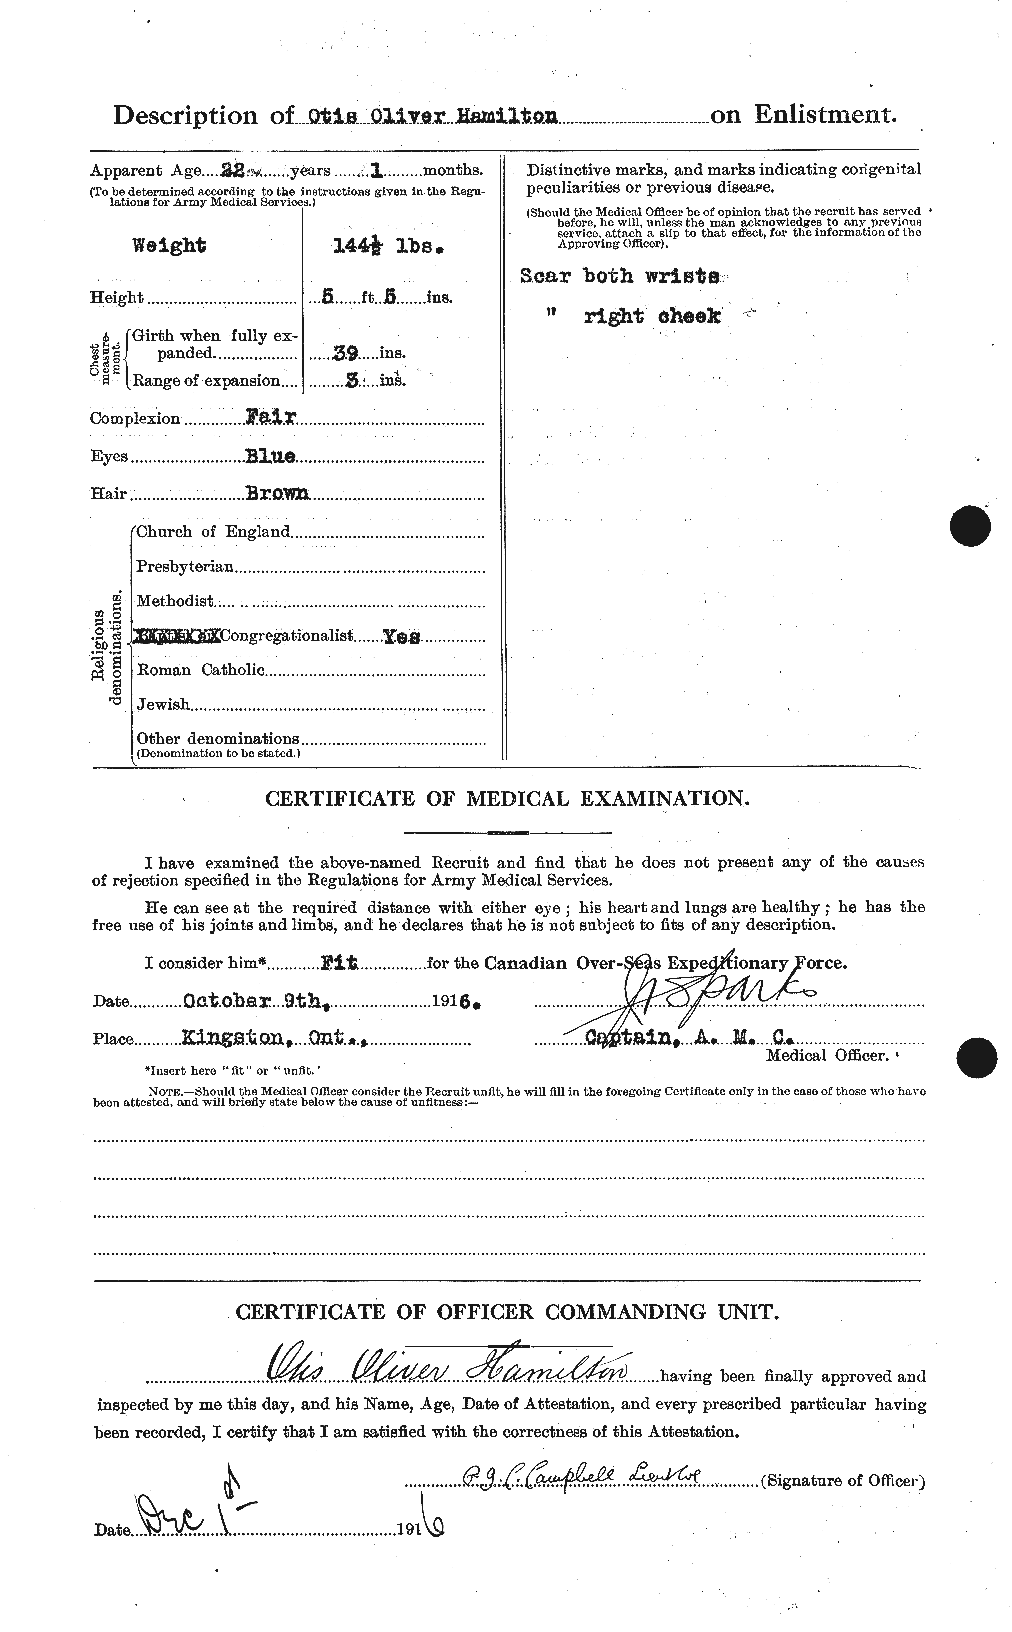 Personnel Records of the First World War - CEF 376534b